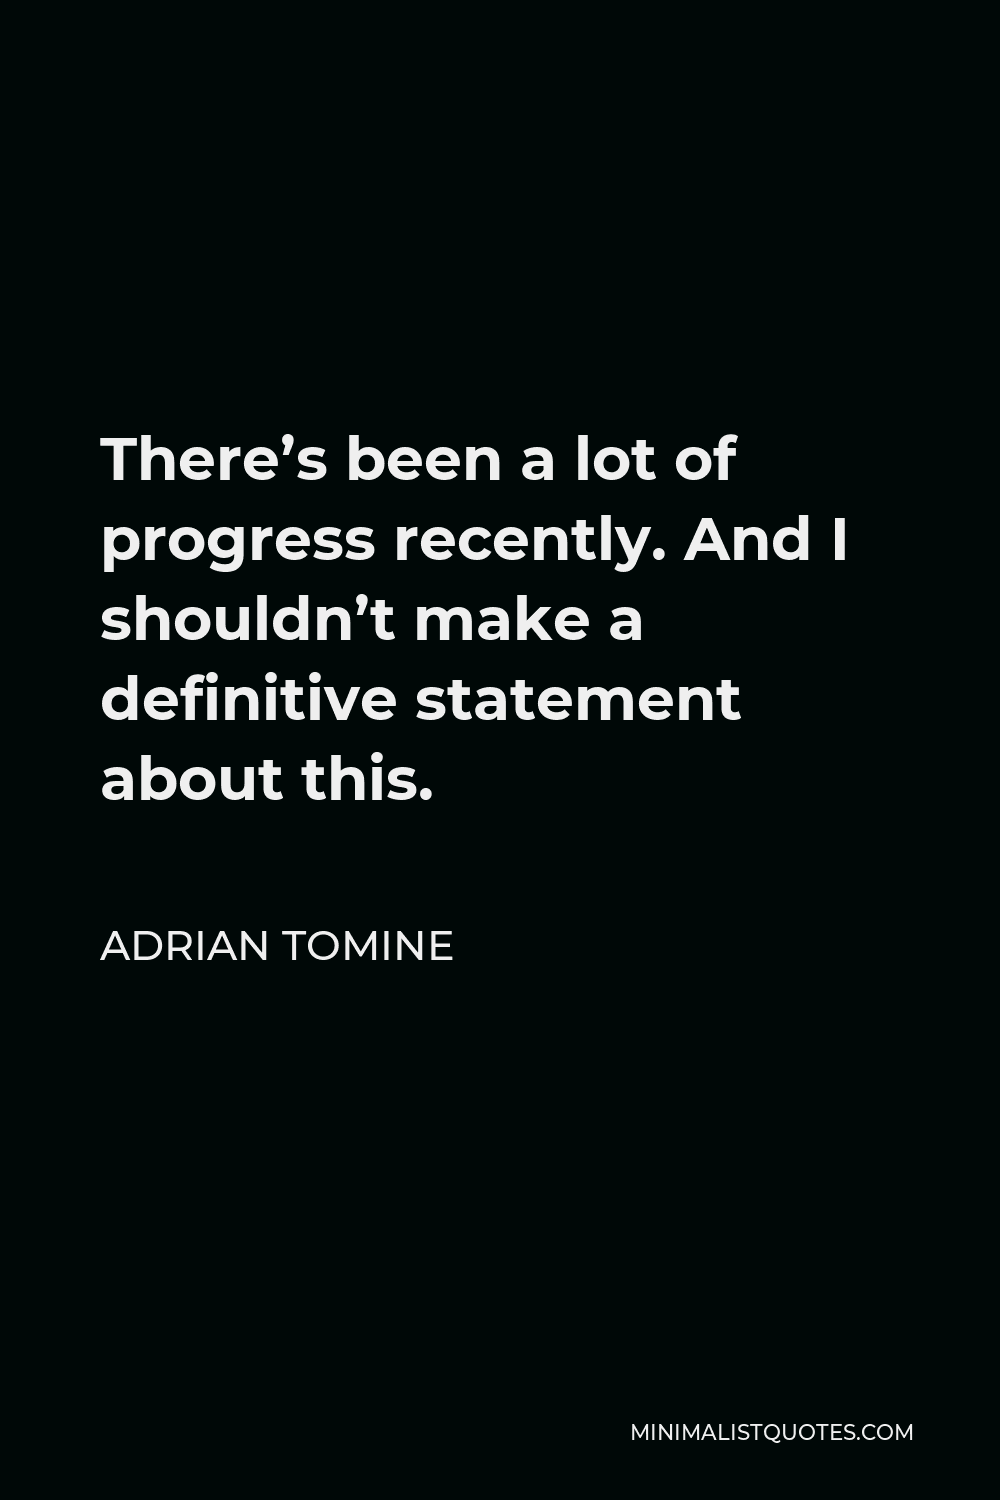 Adrian Tomine Quote - There’s been a lot of progress recently. And I shouldn’t make a definitive statement about this.